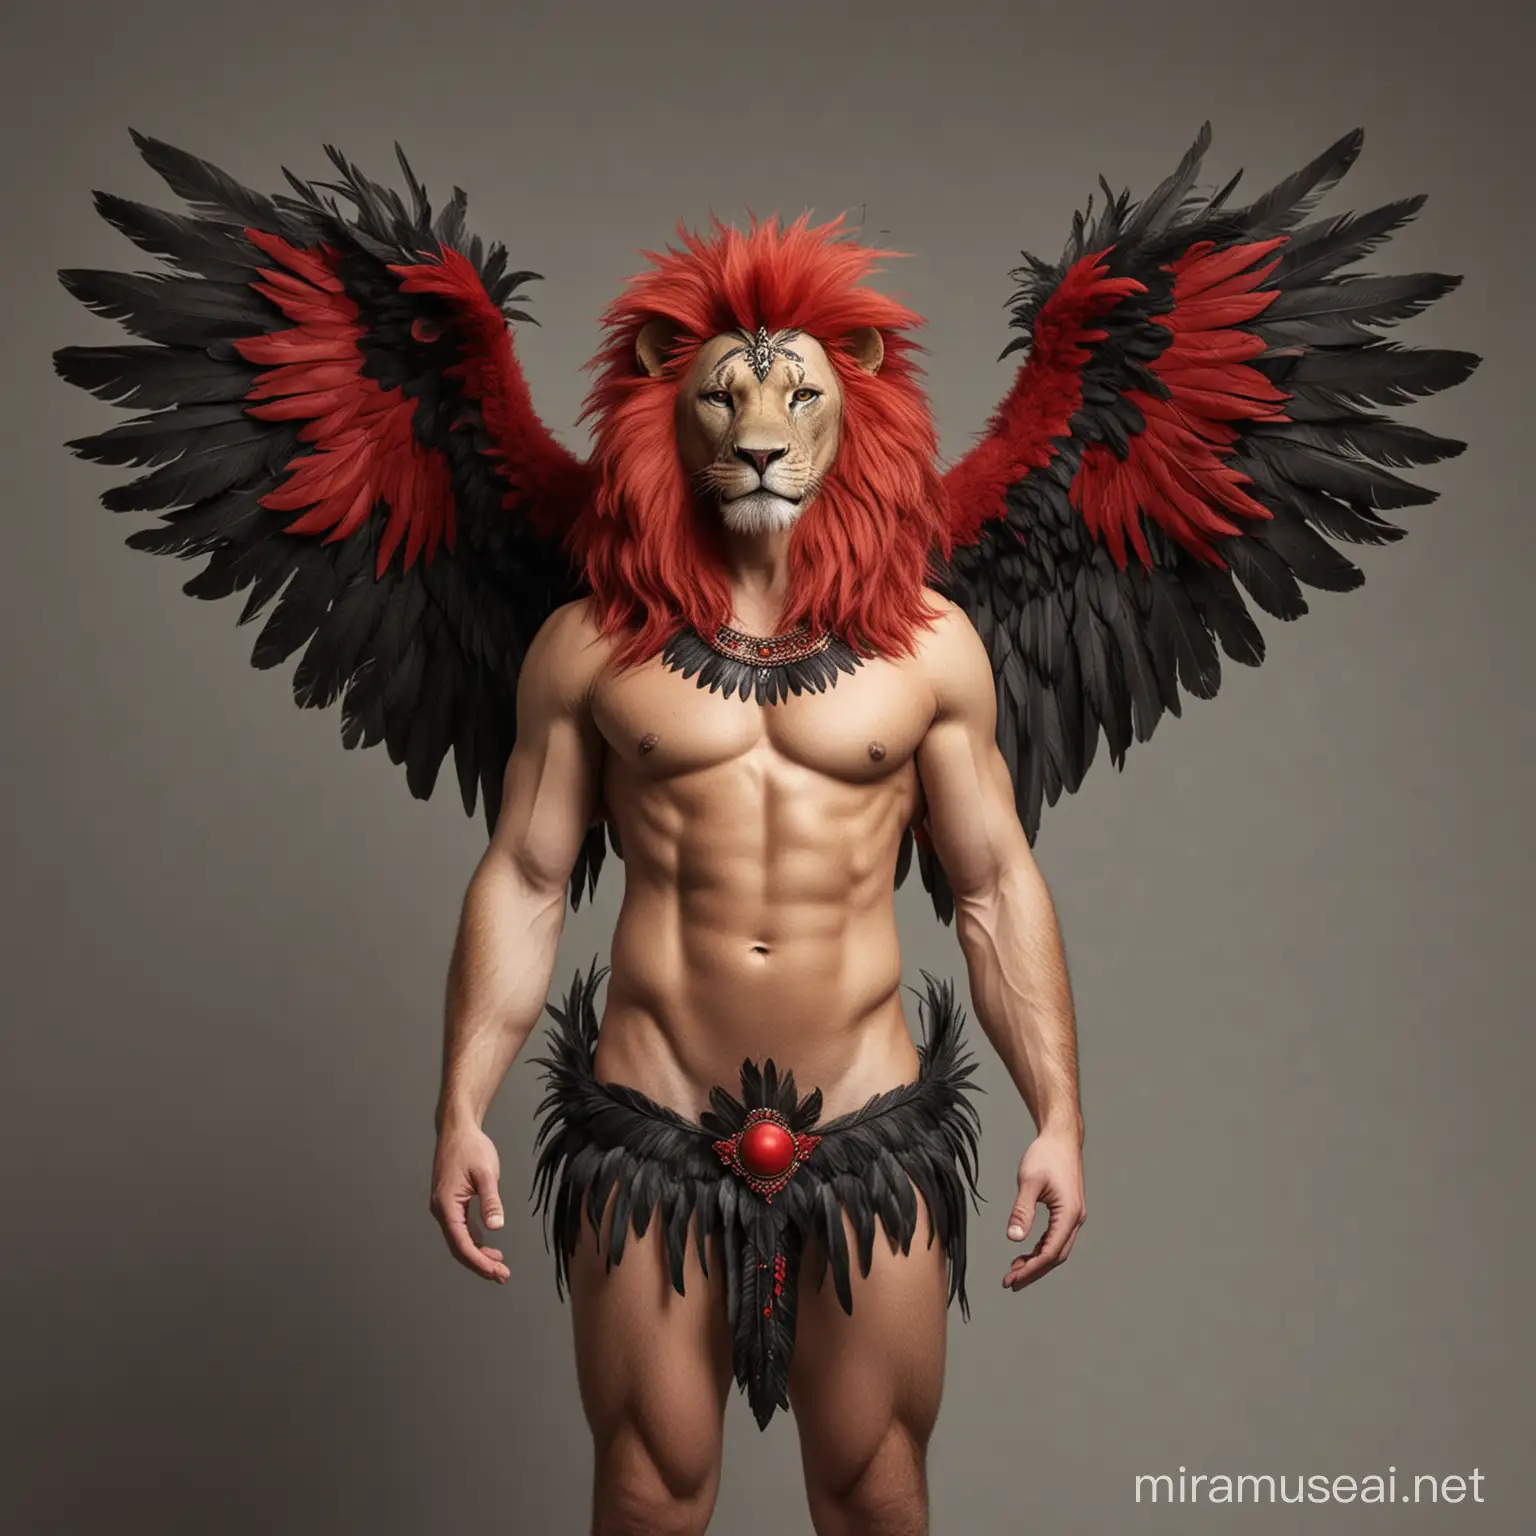 lion body and bird wings with black and red hair and feathers